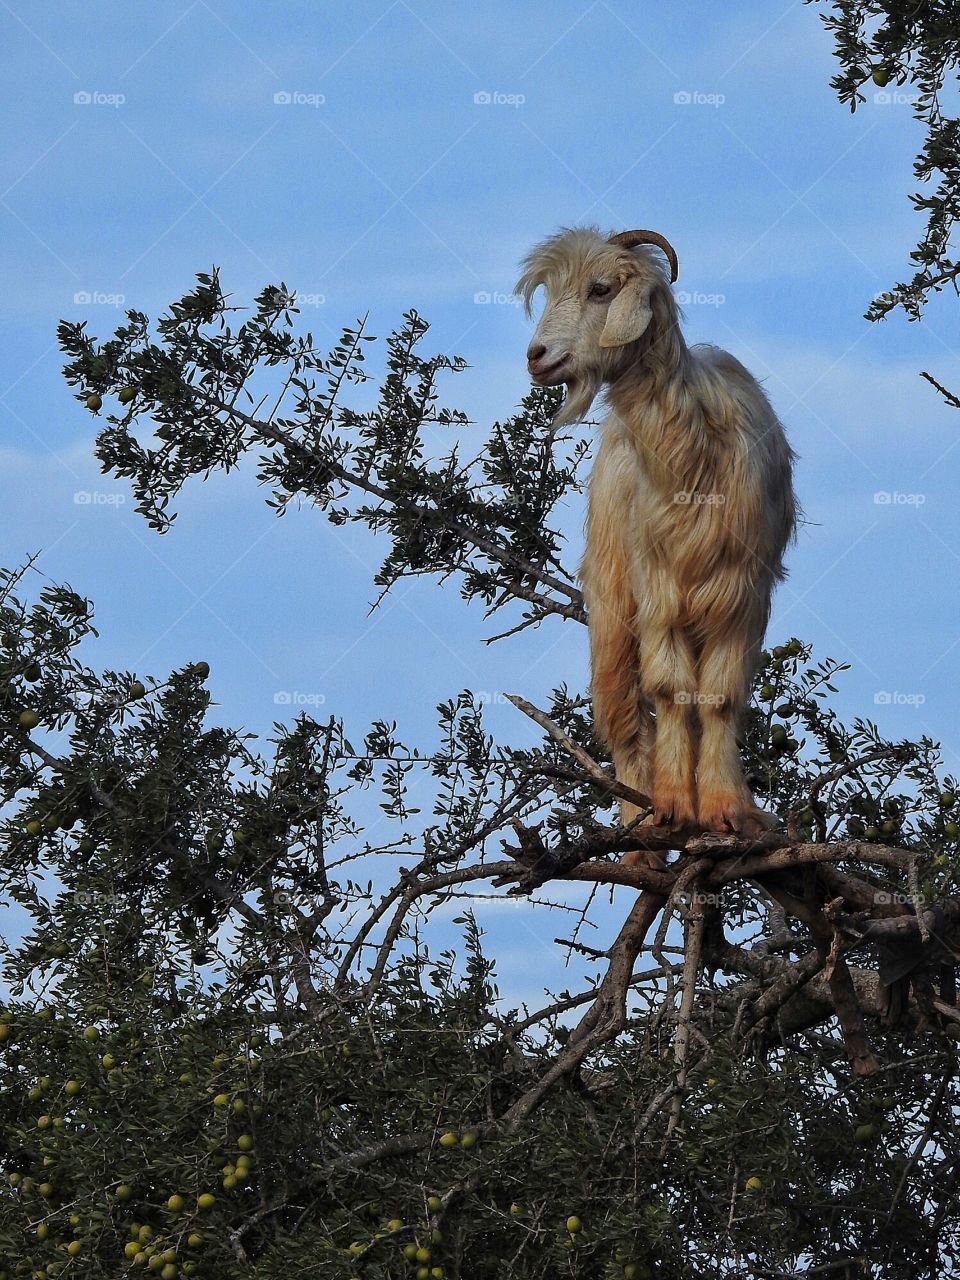 Goat in a tree